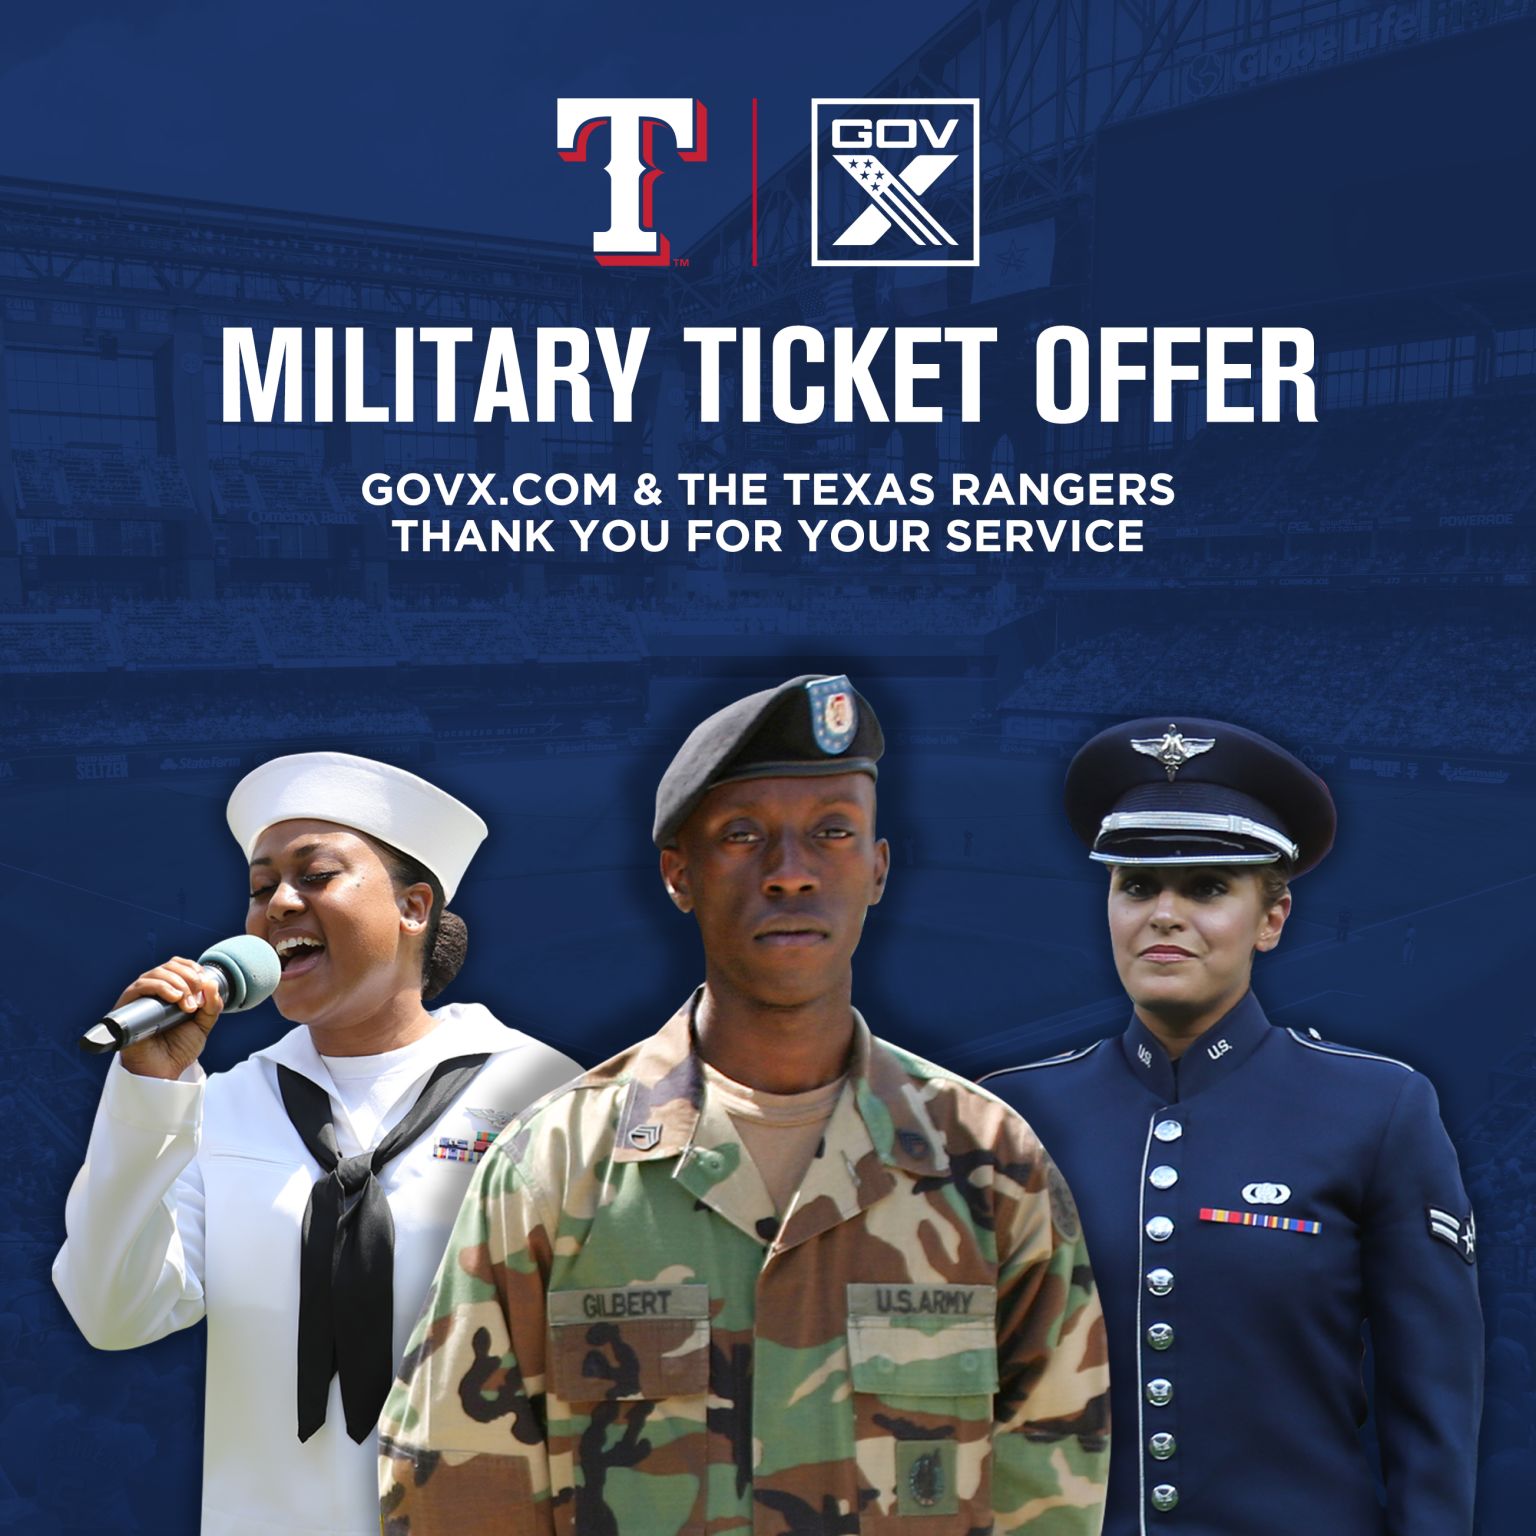 Texas Rangers - Join our gameday Promotions staff for the